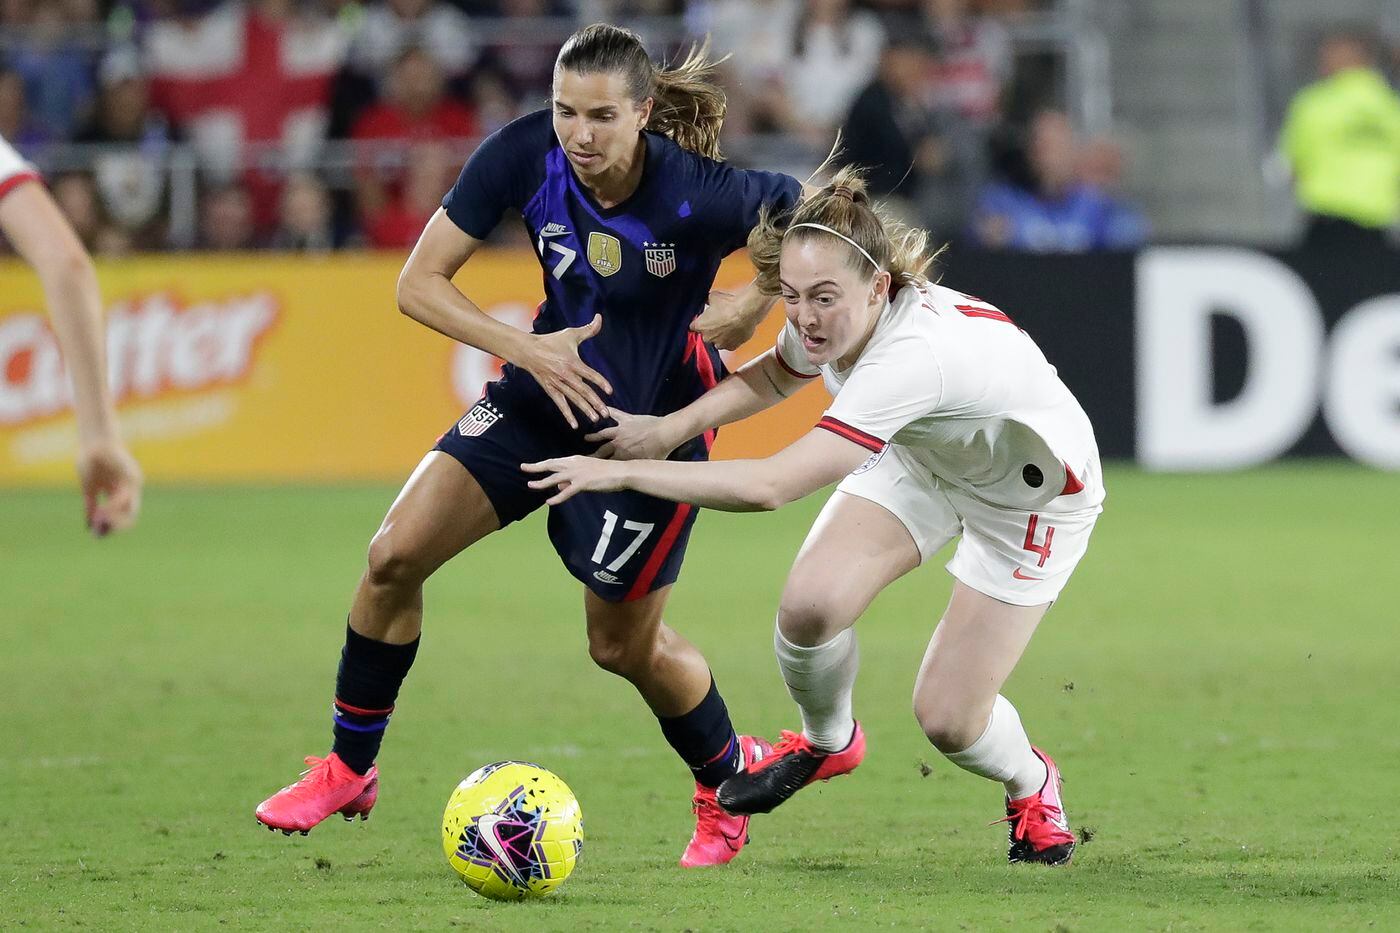 Report: Tobin Heath signs with Manchester United